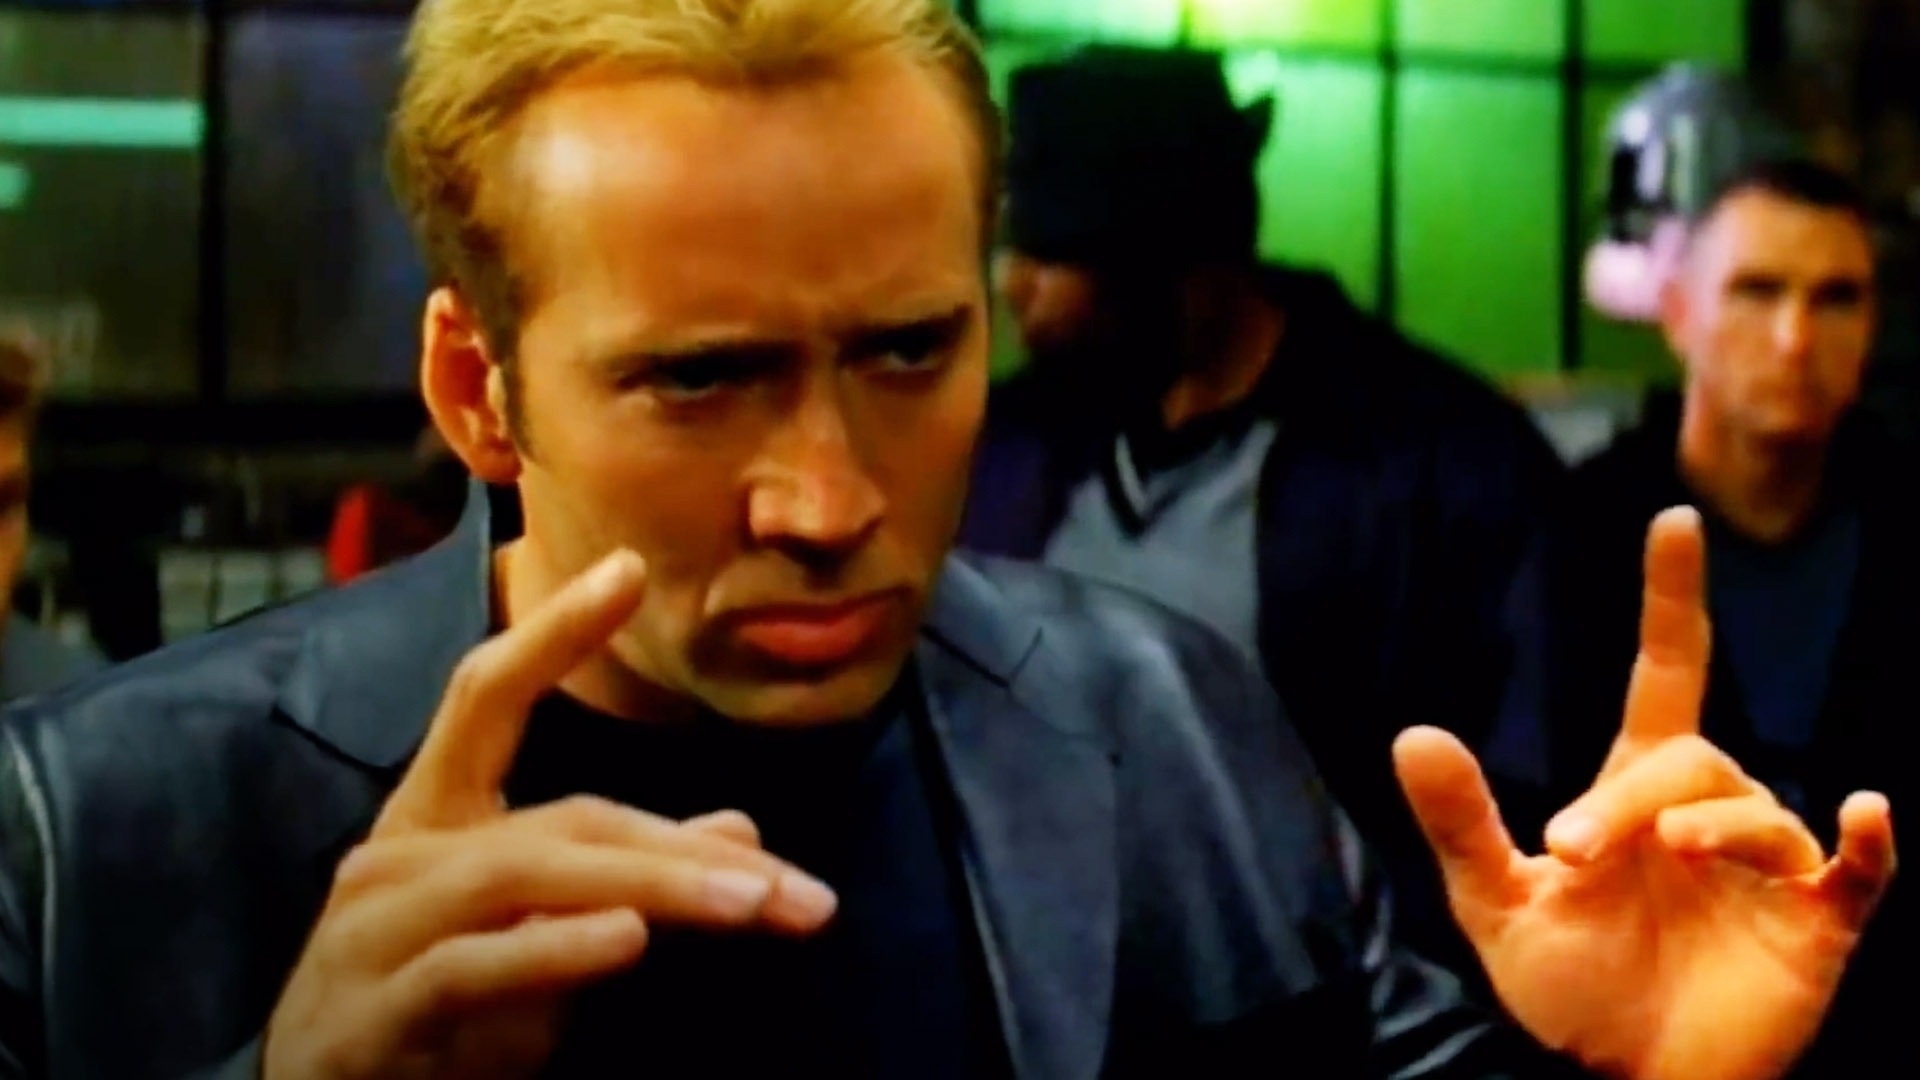 Nicolas Cage making a hand gesture as if explaining something, in a scene from a movie